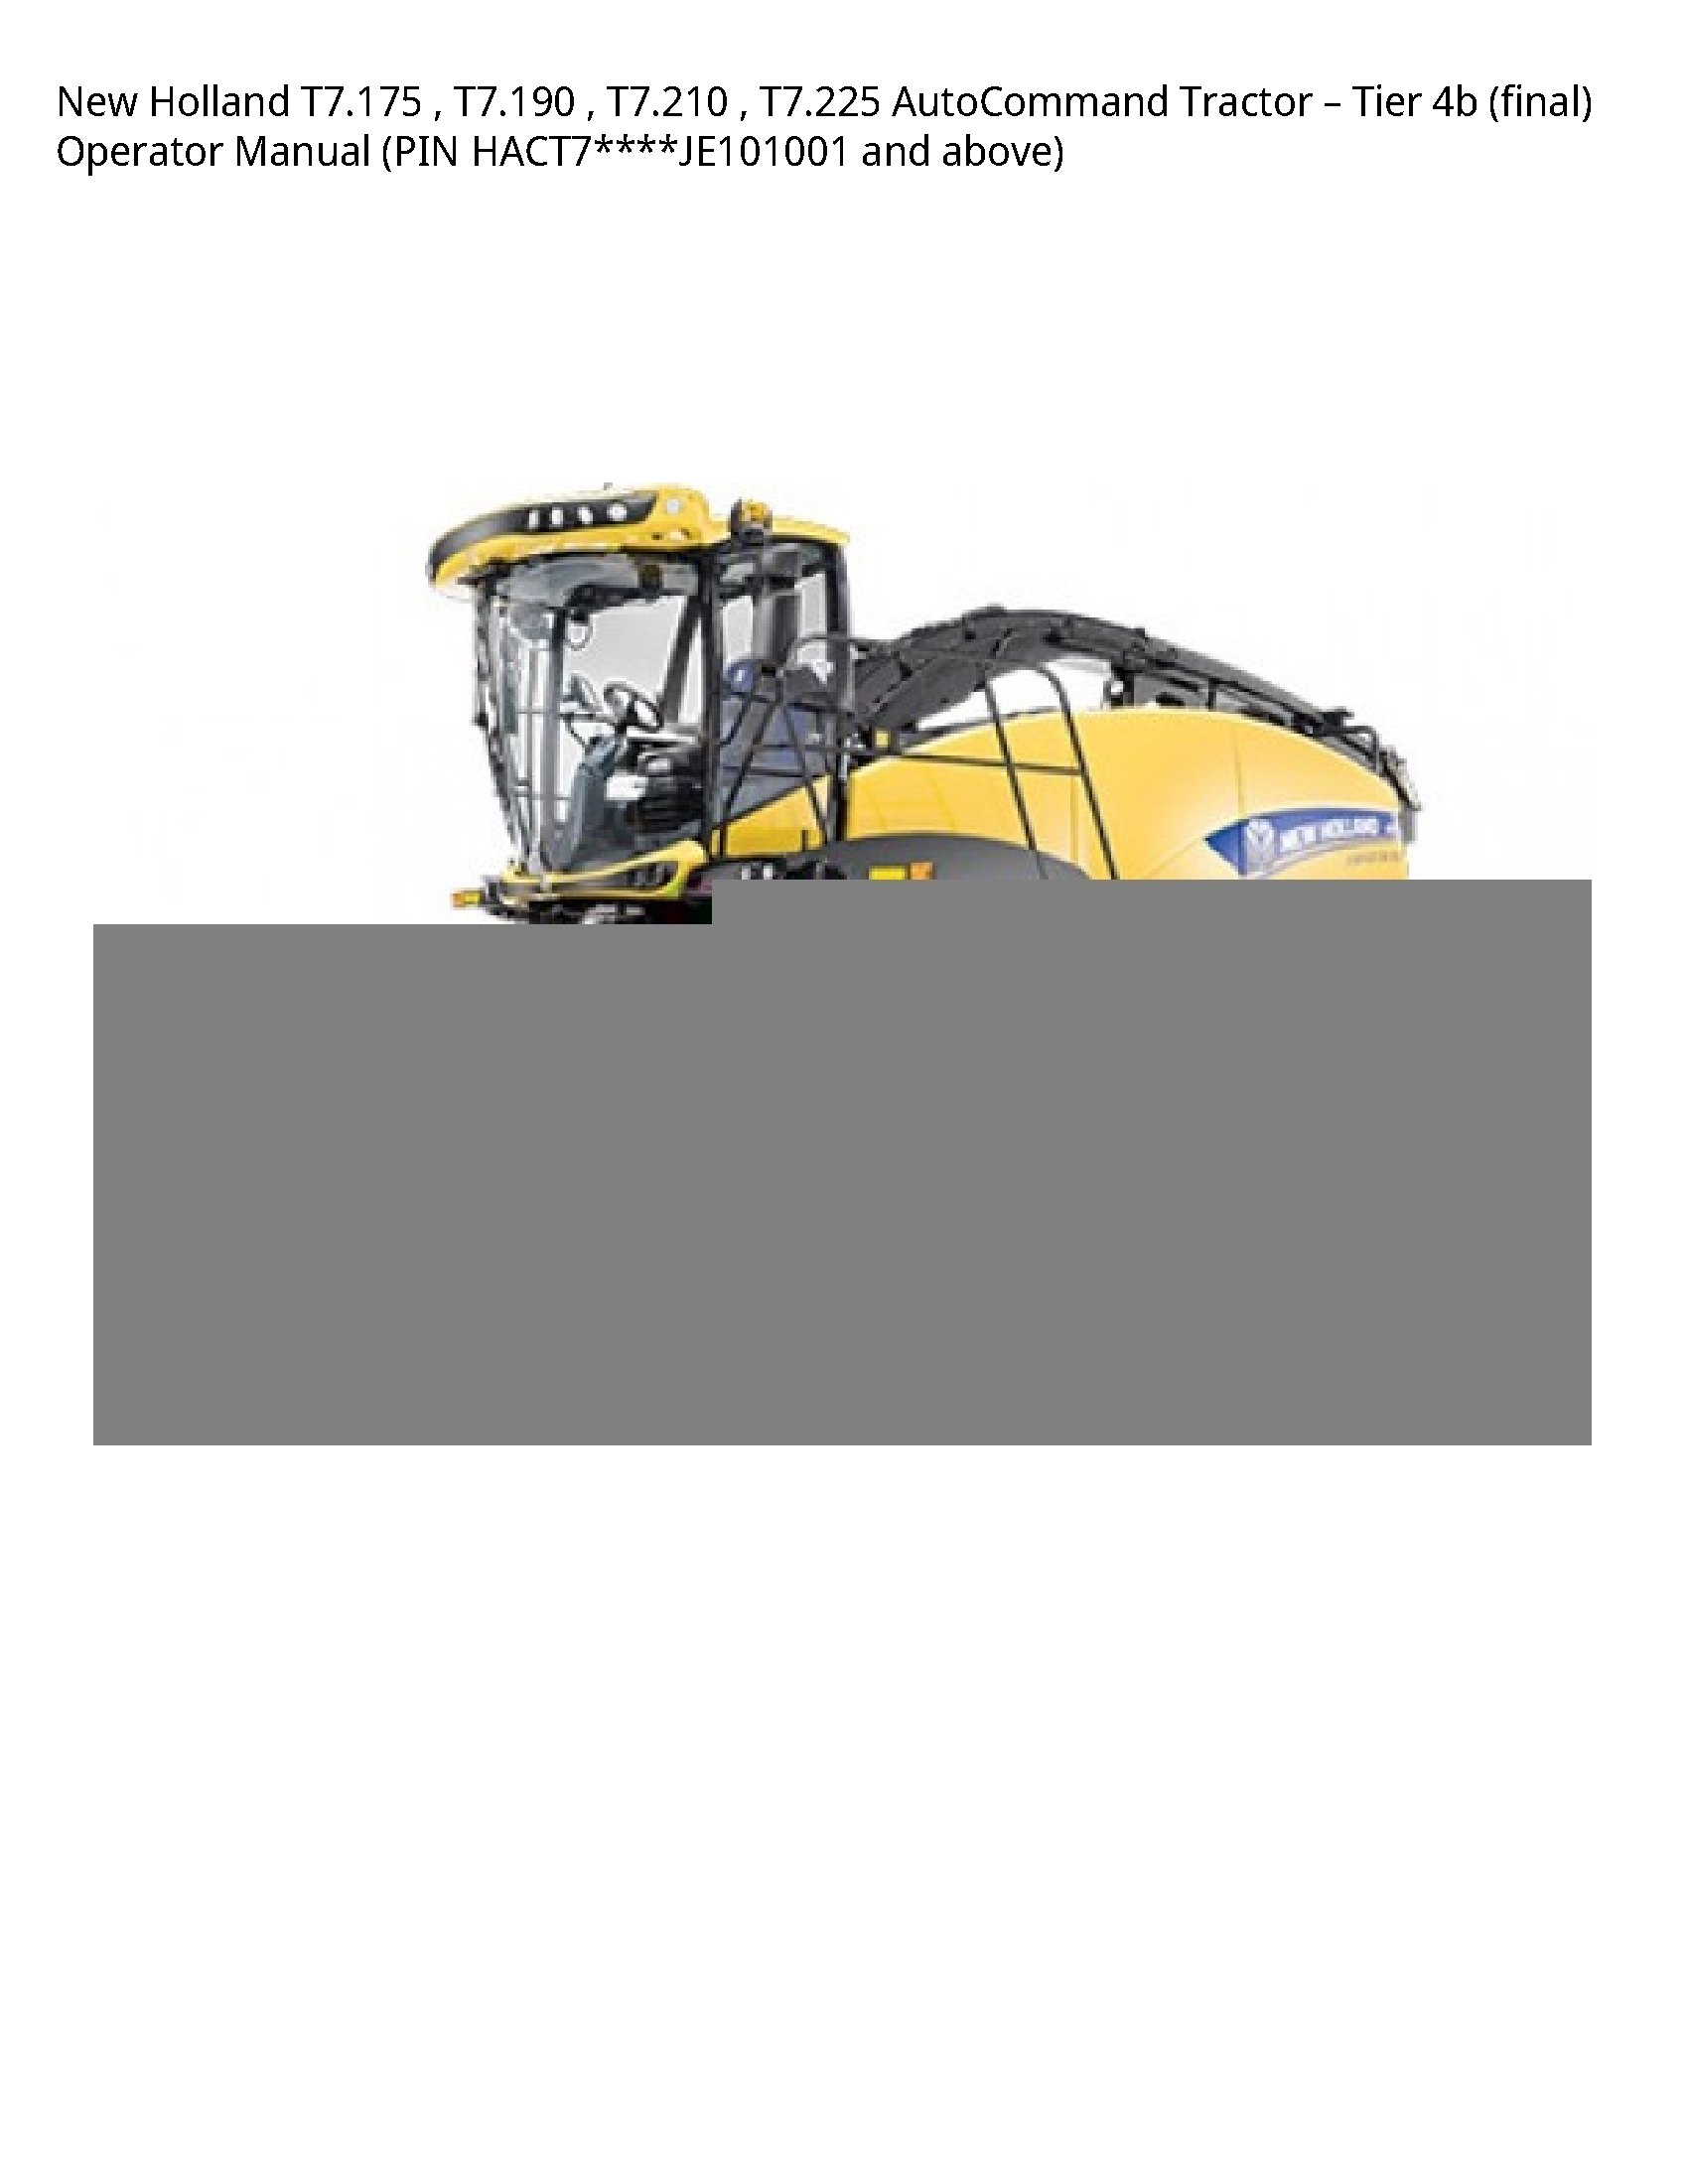 New Holland T7.175 AutoCommand Tractor Tier (final) Operator manual